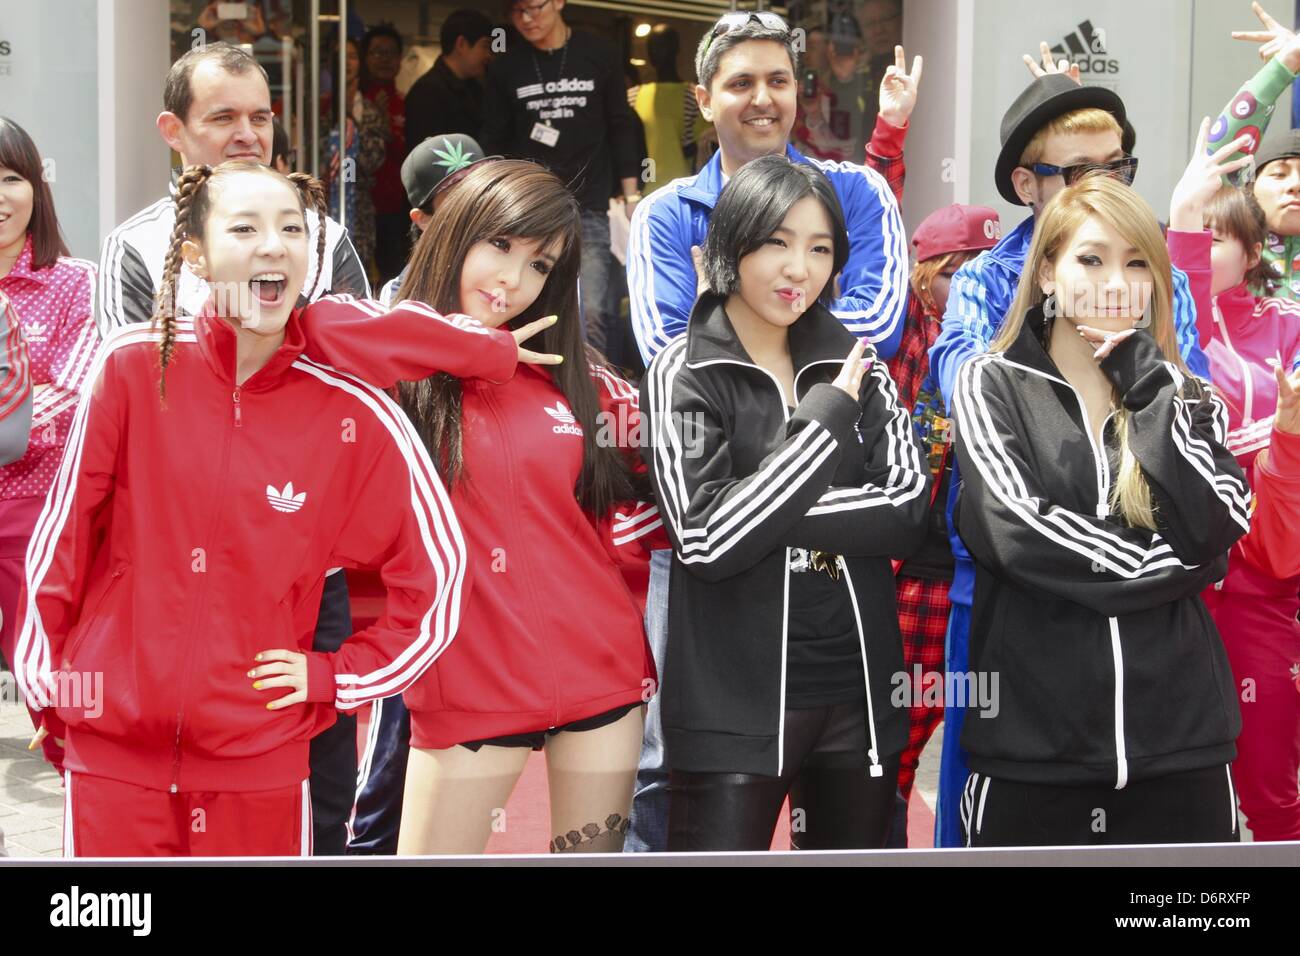 2NE1 attended opening ceremony of store in Seoul, South Korea on Friday April 19, Stock Photo - Alamy